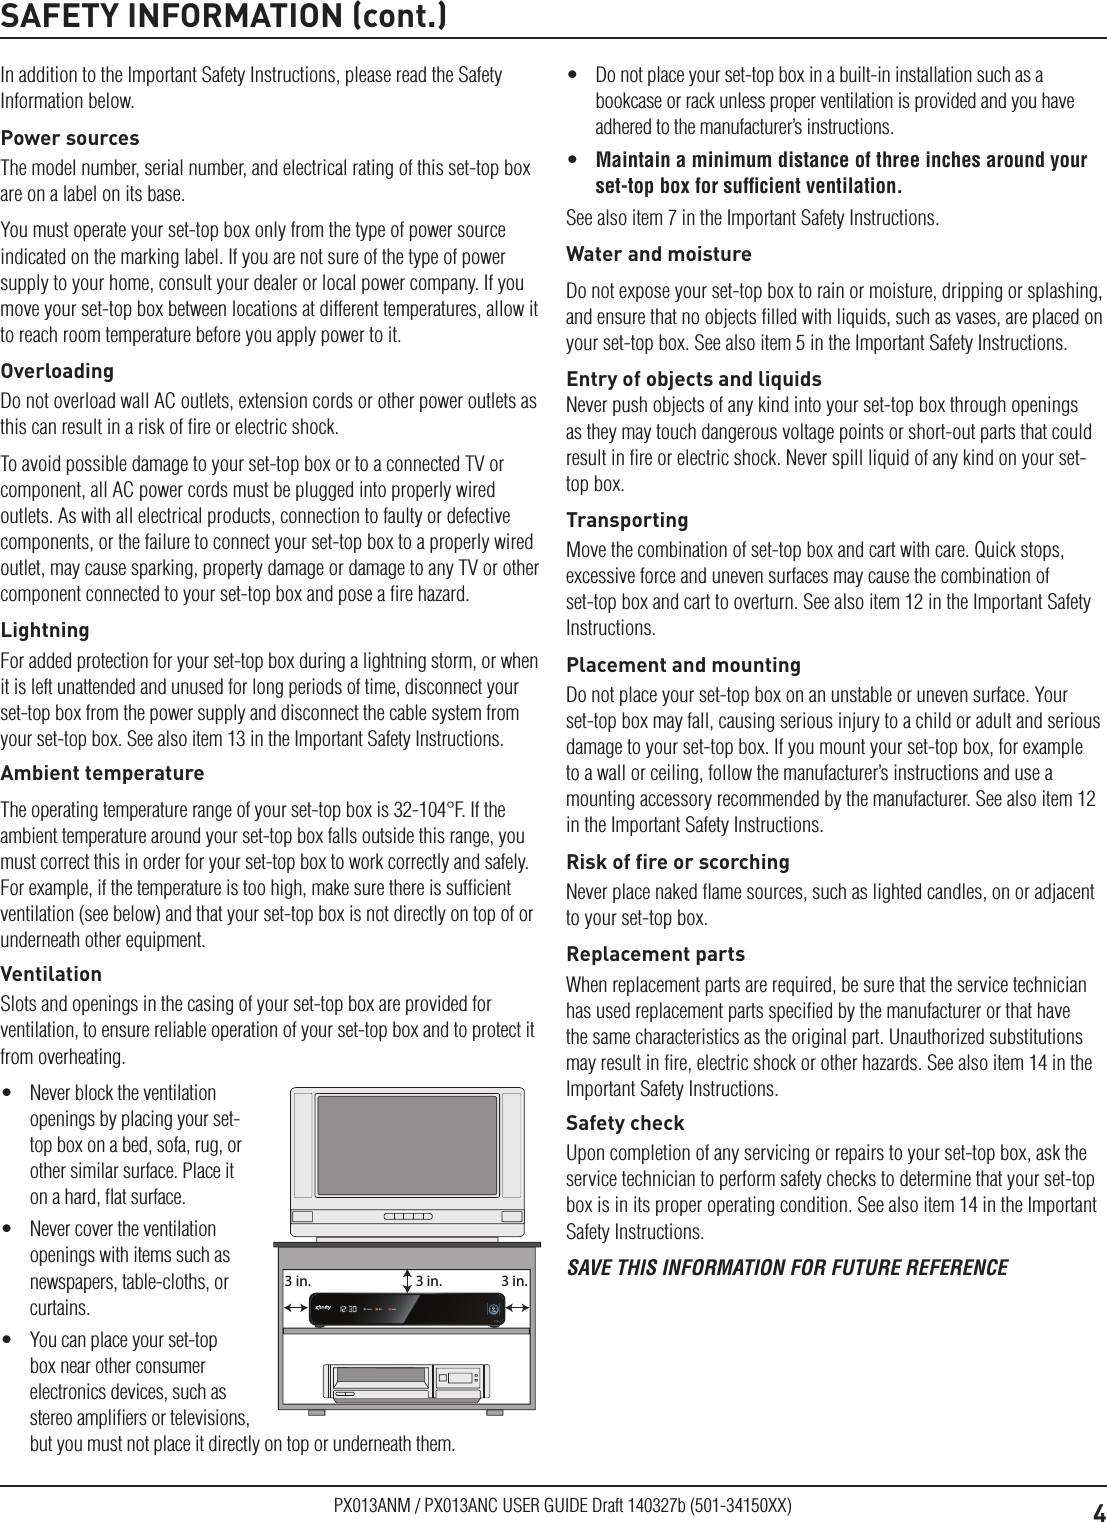 4PX013ANM / PX013ANC USER GUIDE Draft 140327b (501-34150XX)SAFETY INFORMATION (cont.)In addition to the Important Safety Instructions, please read the Safety Information below.Power sourcesThe model number, serial number, and electrical rating of this set-top box are on a label on its base.You must operate your set-top box only from the type of power source indicated on the marking label. If you are not sure of the type of power supply to your home, consult your dealer or local power company. If you move your set-top box between locations at different temperatures, allow it to reach room temperature before you apply power to it.OverloadingDo not overload wall AC outlets, extension cords or other power outlets as this can result in a risk of ﬁre or electric shock.To avoid possible damage to your set-top box or to a connected TV or component, all AC power cords must be plugged into properly wired outlets. As with all electrical products, connection to faulty or defective components, or the failure to connect your set-top box to a properly wired outlet, may cause sparking, property damage or damage to any TV or other component connected to your set-top box and pose a ﬁre hazard.LightningFor added protection for your set-top box during a lightning storm, or when it is left unattended and unused for long periods of time, disconnect your set-top box from the power supply and disconnect the cable system from your set-top box. See also item 13 in the Important Safety Instructions.Ambient temperatureThe operating temperature range of your set-top box is 32-104°F. If the ambient temperature around your set-top box falls outside this range, you must correct this in order for your set-top box to work correctly and safely. For example, if the temperature is too high, make sure there is sufﬁcient ventilation (see below) and that your set-top box is not directly on top of or underneath other equipment.VentilationSlots and openings in the casing of your set-top box are provided for ventilation, to ensure reliable operation of your set-top box and to protect it from overheating.•  Never block the ventilation openings by placing your set-top box on a bed, sofa, rug, or other similar surface. Place it on a hard, ﬂat surface.•  Never cover the ventilation openings with items such as newspapers, table-cloths, or curtains.•  You can place your set-top box near other consumer electronics devices, such as stereo ampliﬁers or televisions, but you must not place it directly on top or underneath them.3 in. 3 in.3 in.•  Do not place your set-top box in a built-in installation such as a bookcase or rack unless proper ventilation is provided and you have adhered to the manufacturer’s instructions.•  Maintain a minimum distance of three inches around your set-top box for sufﬁcient ventilation.See also item 7 in the Important Safety Instructions.Water and moistureDo not expose your set-top box to rain or moisture, dripping or splashing, and ensure that no objects ﬁlled with liquids, such as vases, are placed on your set-top box. See also item 5 in the Important Safety Instructions.Entry of objects and liquidsNever push objects of any kind into your set-top box through openings as they may touch dangerous voltage points or short-out parts that could result in ﬁre or electric shock. Never spill liquid of any kind on your set-top box.TransportingMove the combination of set-top box and cart with care. Quick stops, excessive force and uneven surfaces may cause the combination of set-top box and cart to overturn. See also item 12 in the Important Safety Instructions.Placement and mountingDo not place your set-top box on an unstable or uneven surface. Your set-top box may fall, causing serious injury to a child or adult and serious damage to your set-top box. If you mount your set-top box, for example to a wall or ceiling, follow the manufacturer’s instructions and use a mounting accessory recommended by the manufacturer. See also item 12 in the Important Safety Instructions.Risk of ﬁre or scorchingNever place naked ﬂame sources, such as lighted candles, on or adjacent to your set-top box.Replacement partsWhen replacement parts are required, be sure that the service technician has used replacement parts speciﬁed by the manufacturer or that have the same characteristics as the original part. Unauthorized substitutions may result in ﬁre, electric shock or other hazards. See also item 14 in the Important Safety Instructions.Safety checkUpon completion of any servicing or repairs to your set-top box, ask the service technician to perform safety checks to determine that your set-top box is in its proper operating condition. See also item 14 in the Important Safety Instructions.SAVE THIS INFORMATION FOR FUTURE REFERENCE